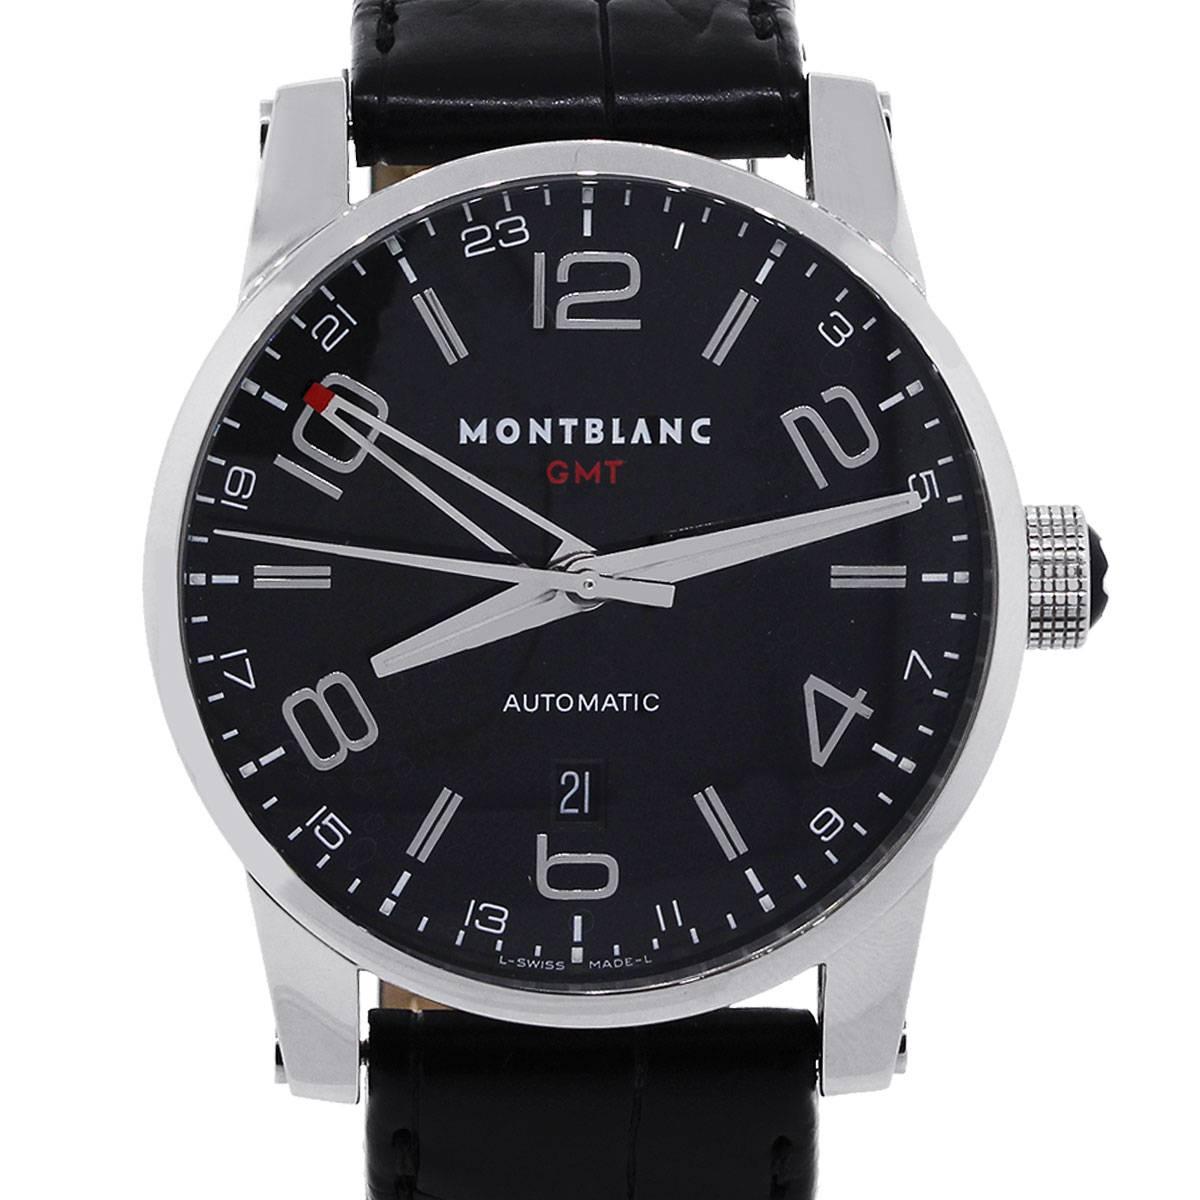 Brand: Montblanc
MPN: 7081
Model: Time walker GTM
Case Material: Stainless Steel
Case Diameter: 42mm
Crystal: Sapphire
Dial: Black dial with Arabic numerals; date is located at 6 o’ clock.
Bracelet: Black leather bracelet
Size: Will fit a 8″